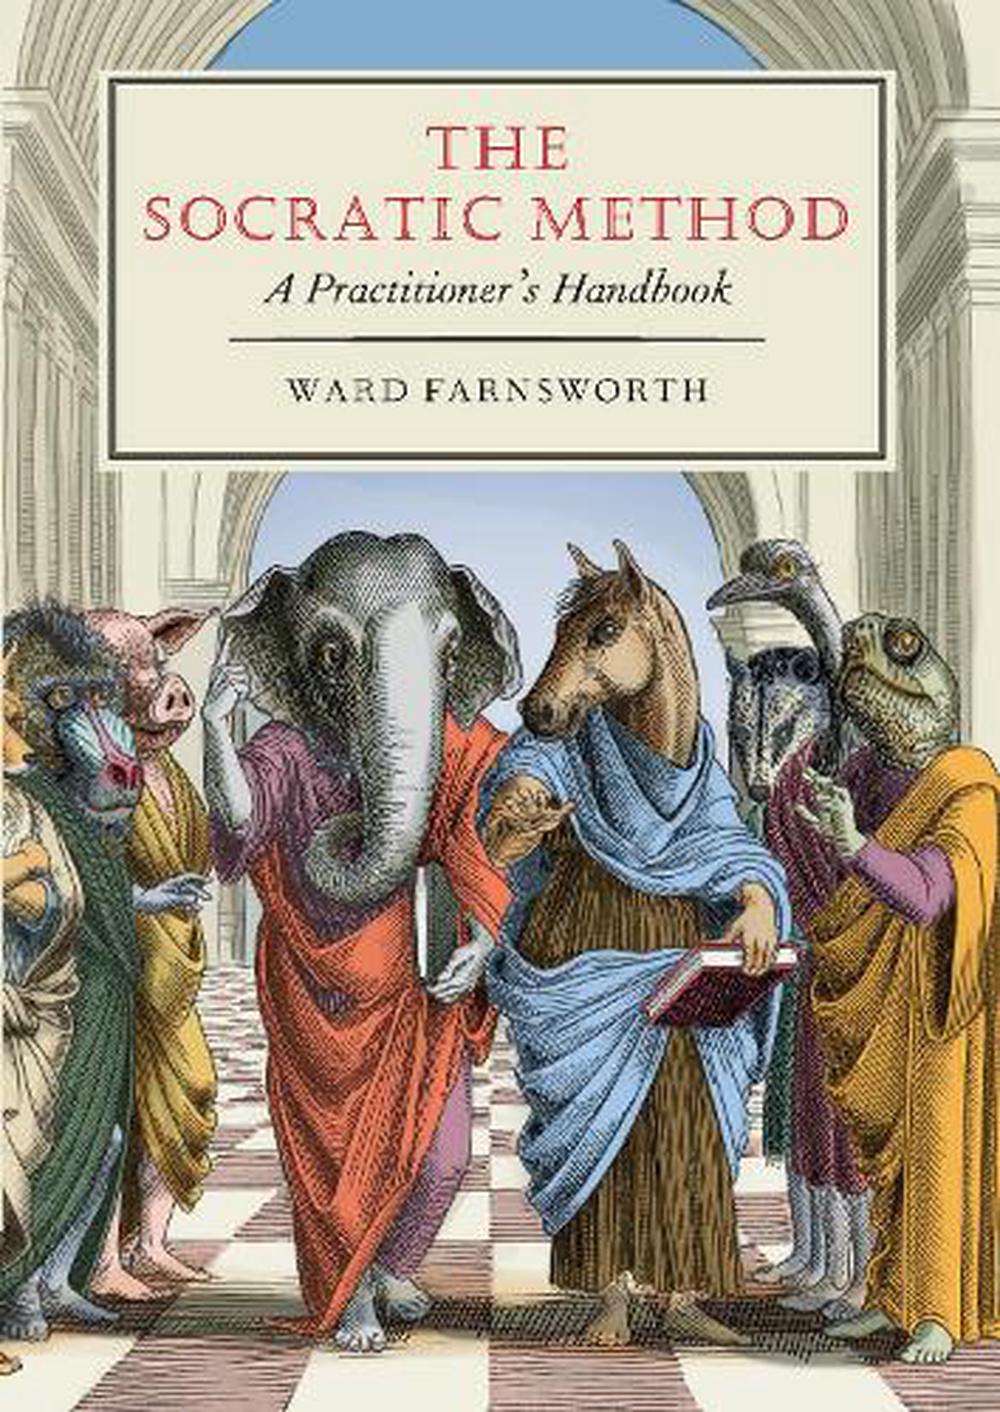 Ward　The　Buy　by　Socratic　Method　Hardcover,　Farnsworth,　at　9781567926859　online　The　Nile